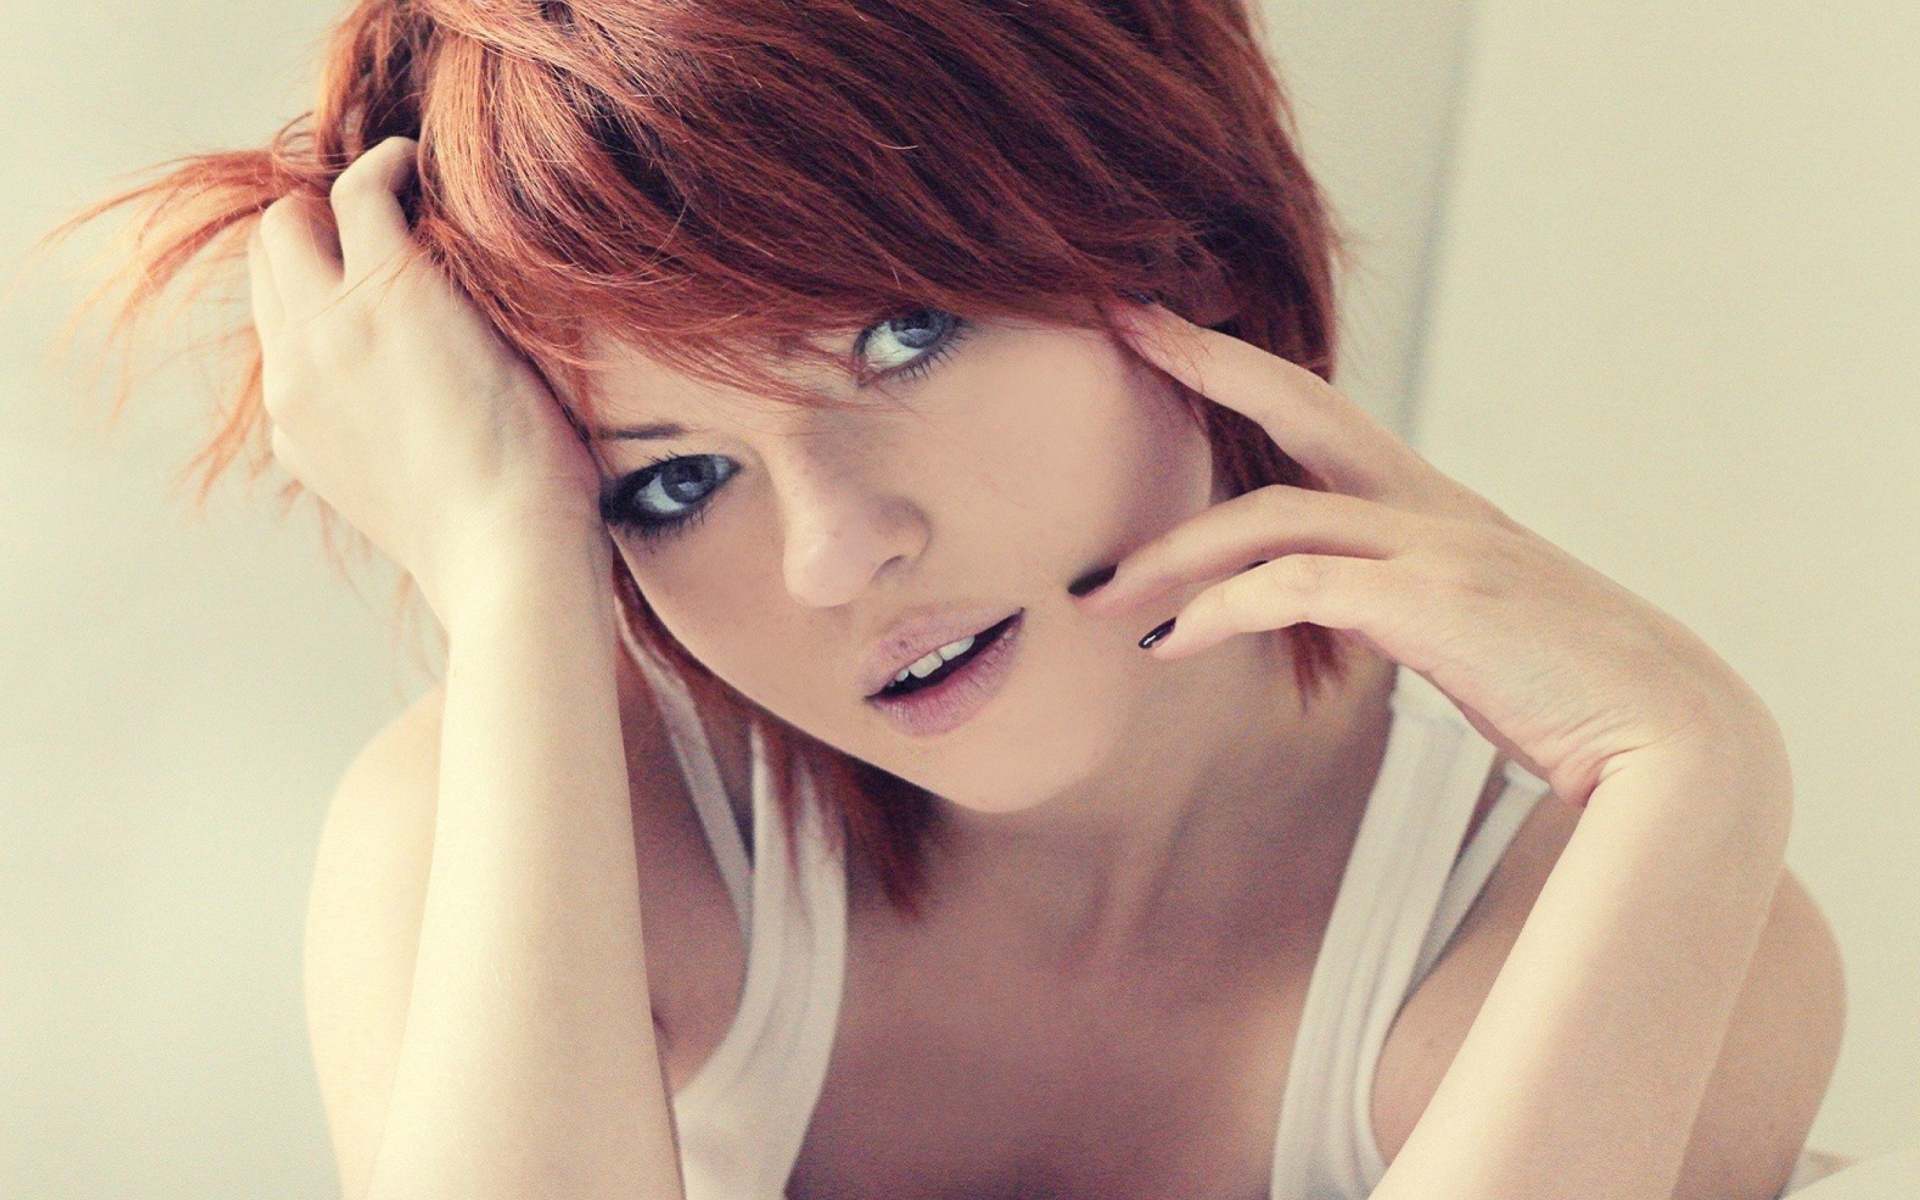 Redhead In White Top wallpaper 1920x1200